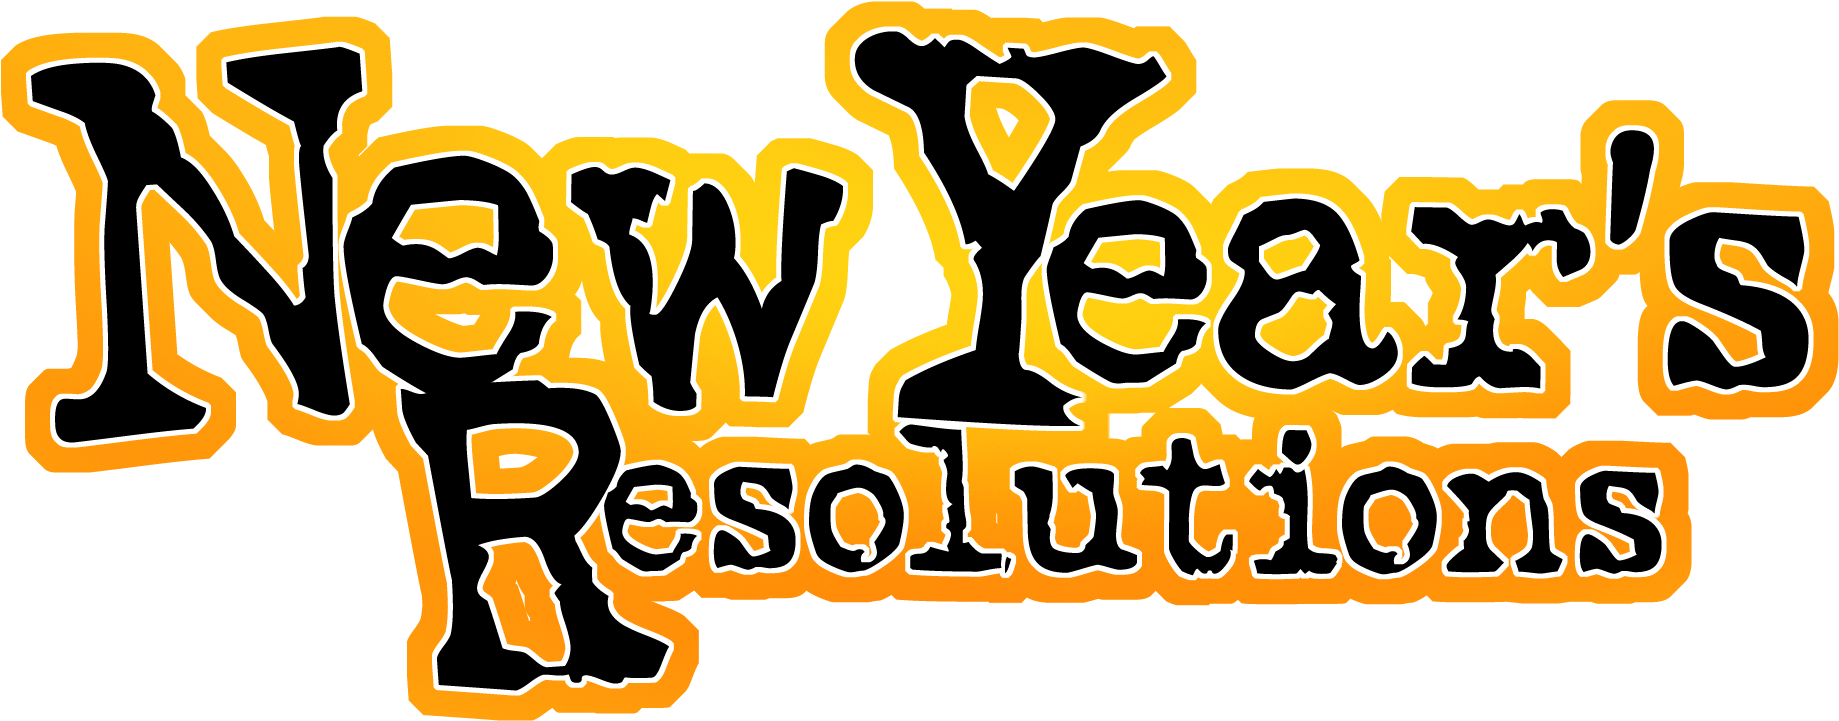 New Years Resolutions Text Graphic PNG